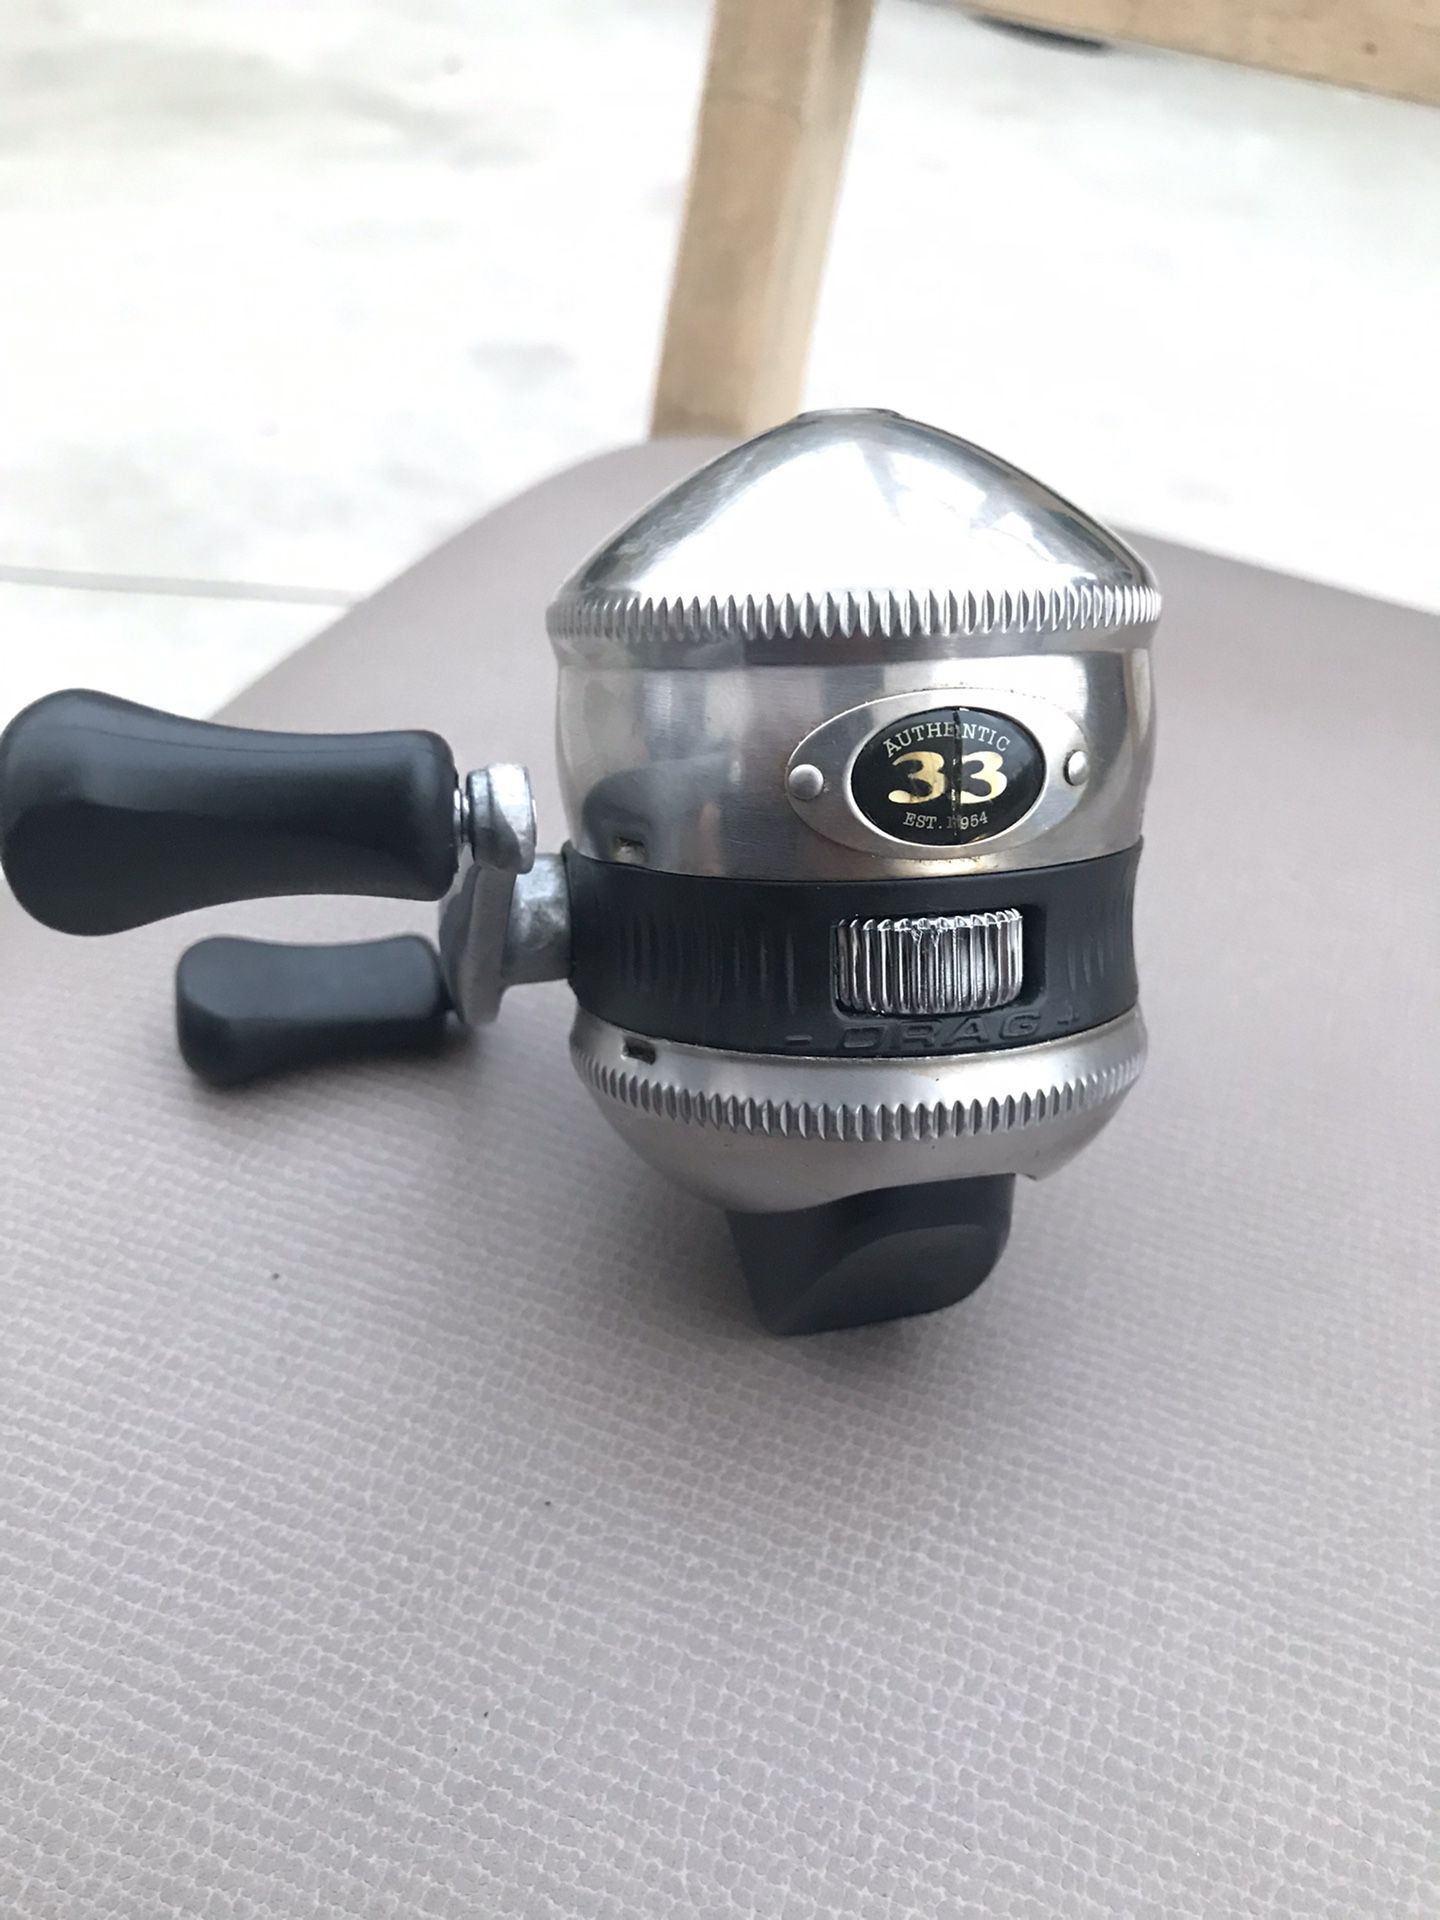 Zebco Authentic 33 Fishing Reel for Sale in Wilmington, CA - OfferUp